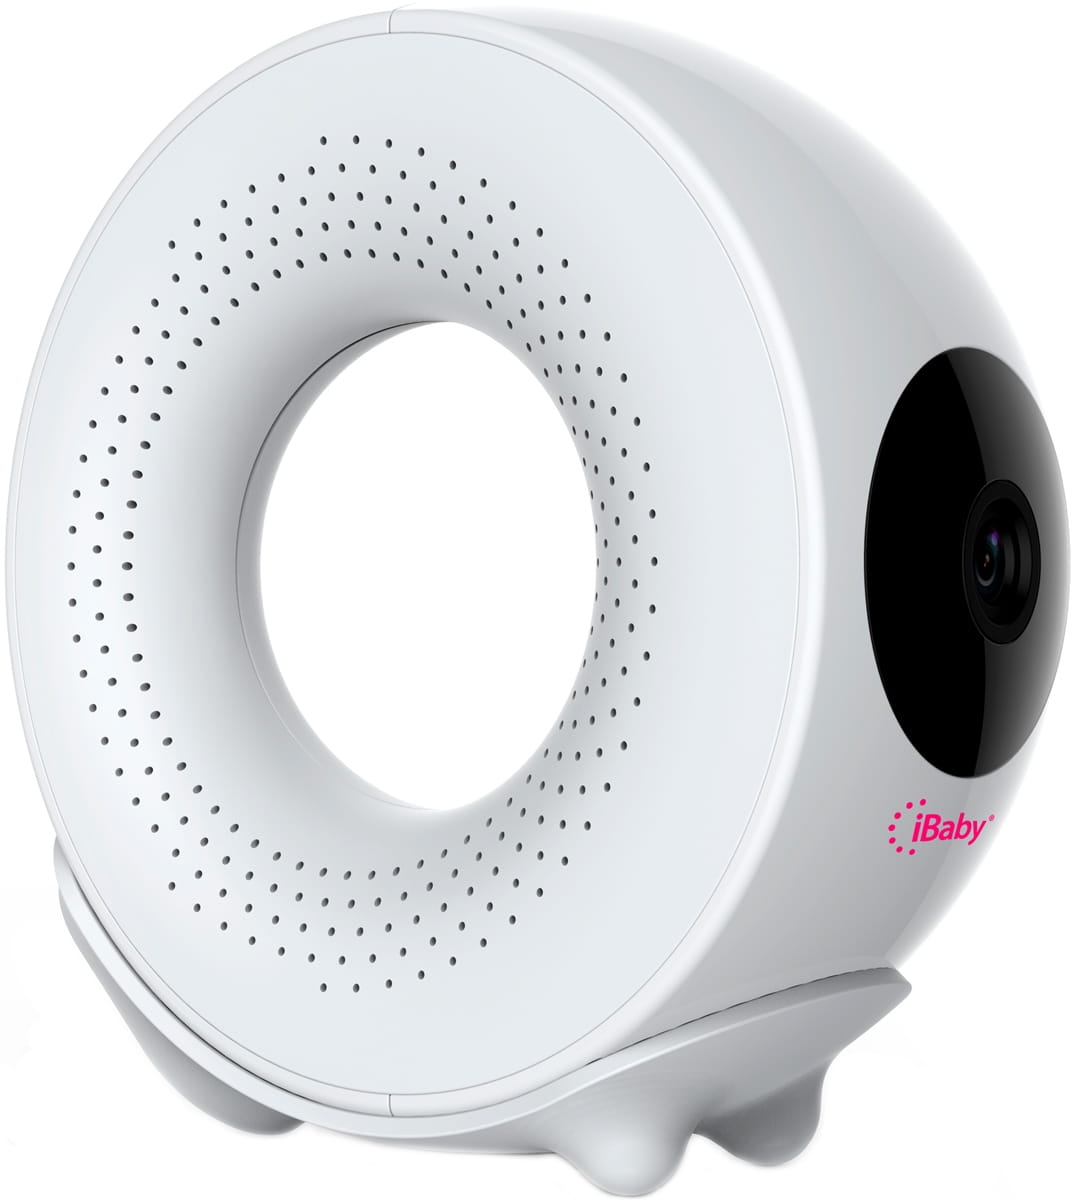   iBaby Monitor M2S Plus